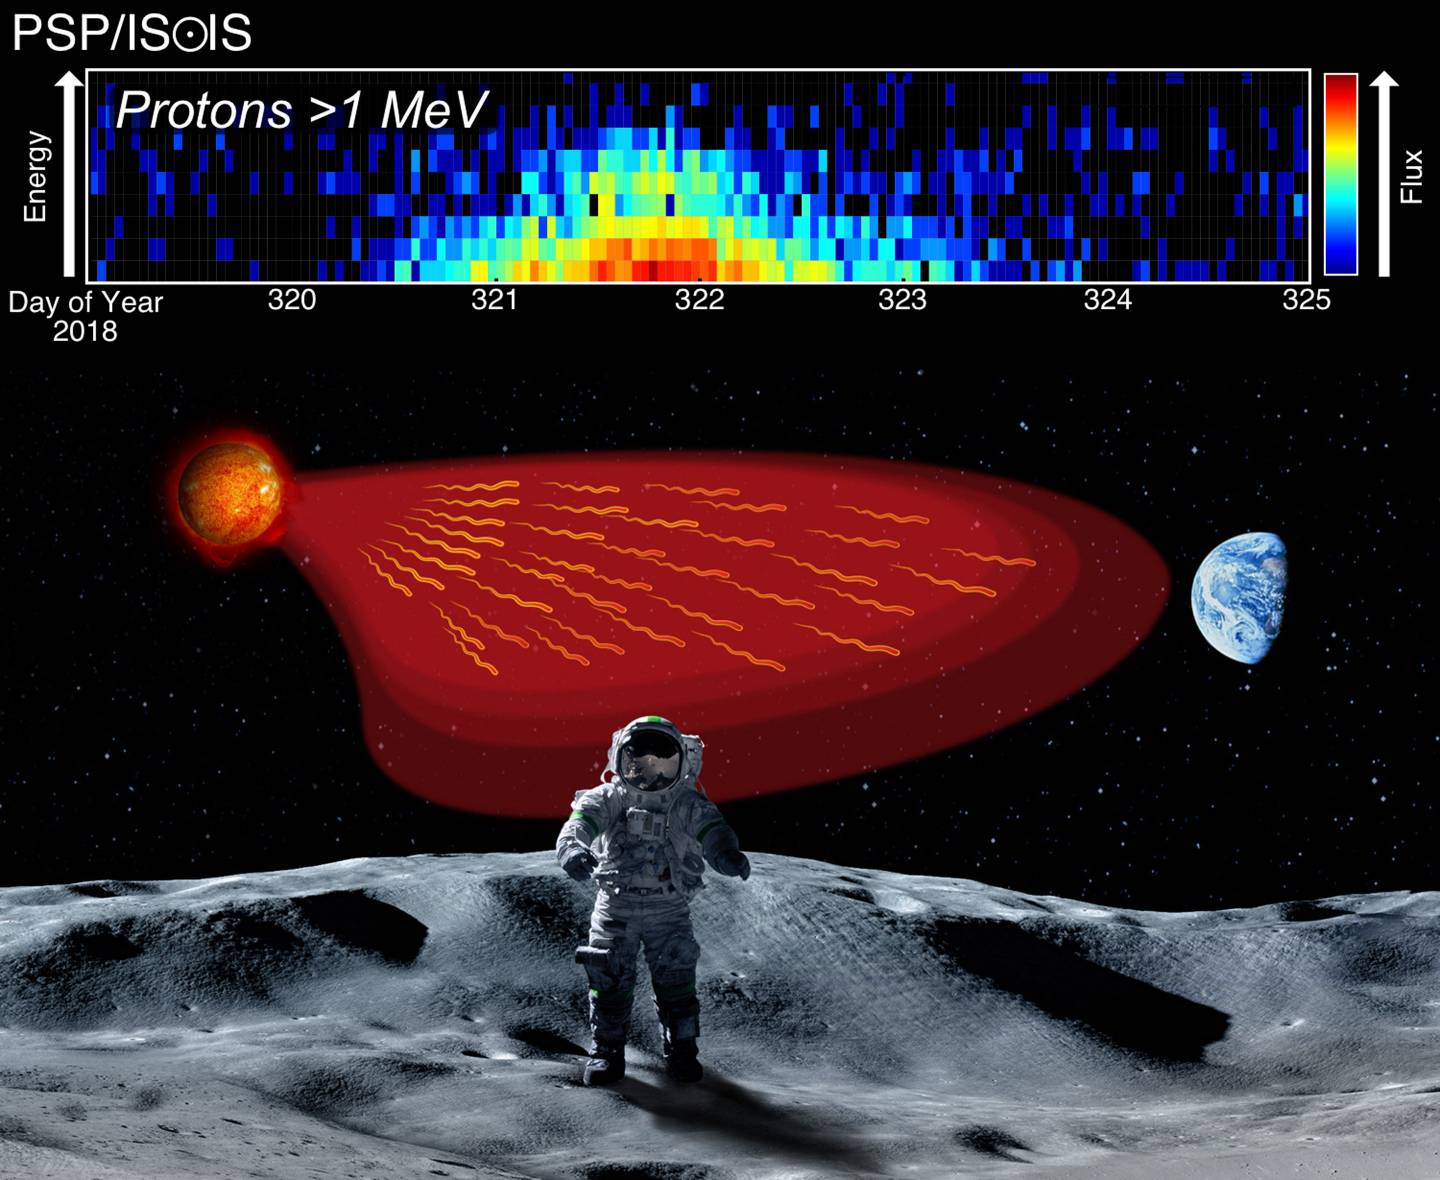 Recorded ISʘIS observations over a drawing of an astronaut on the moon